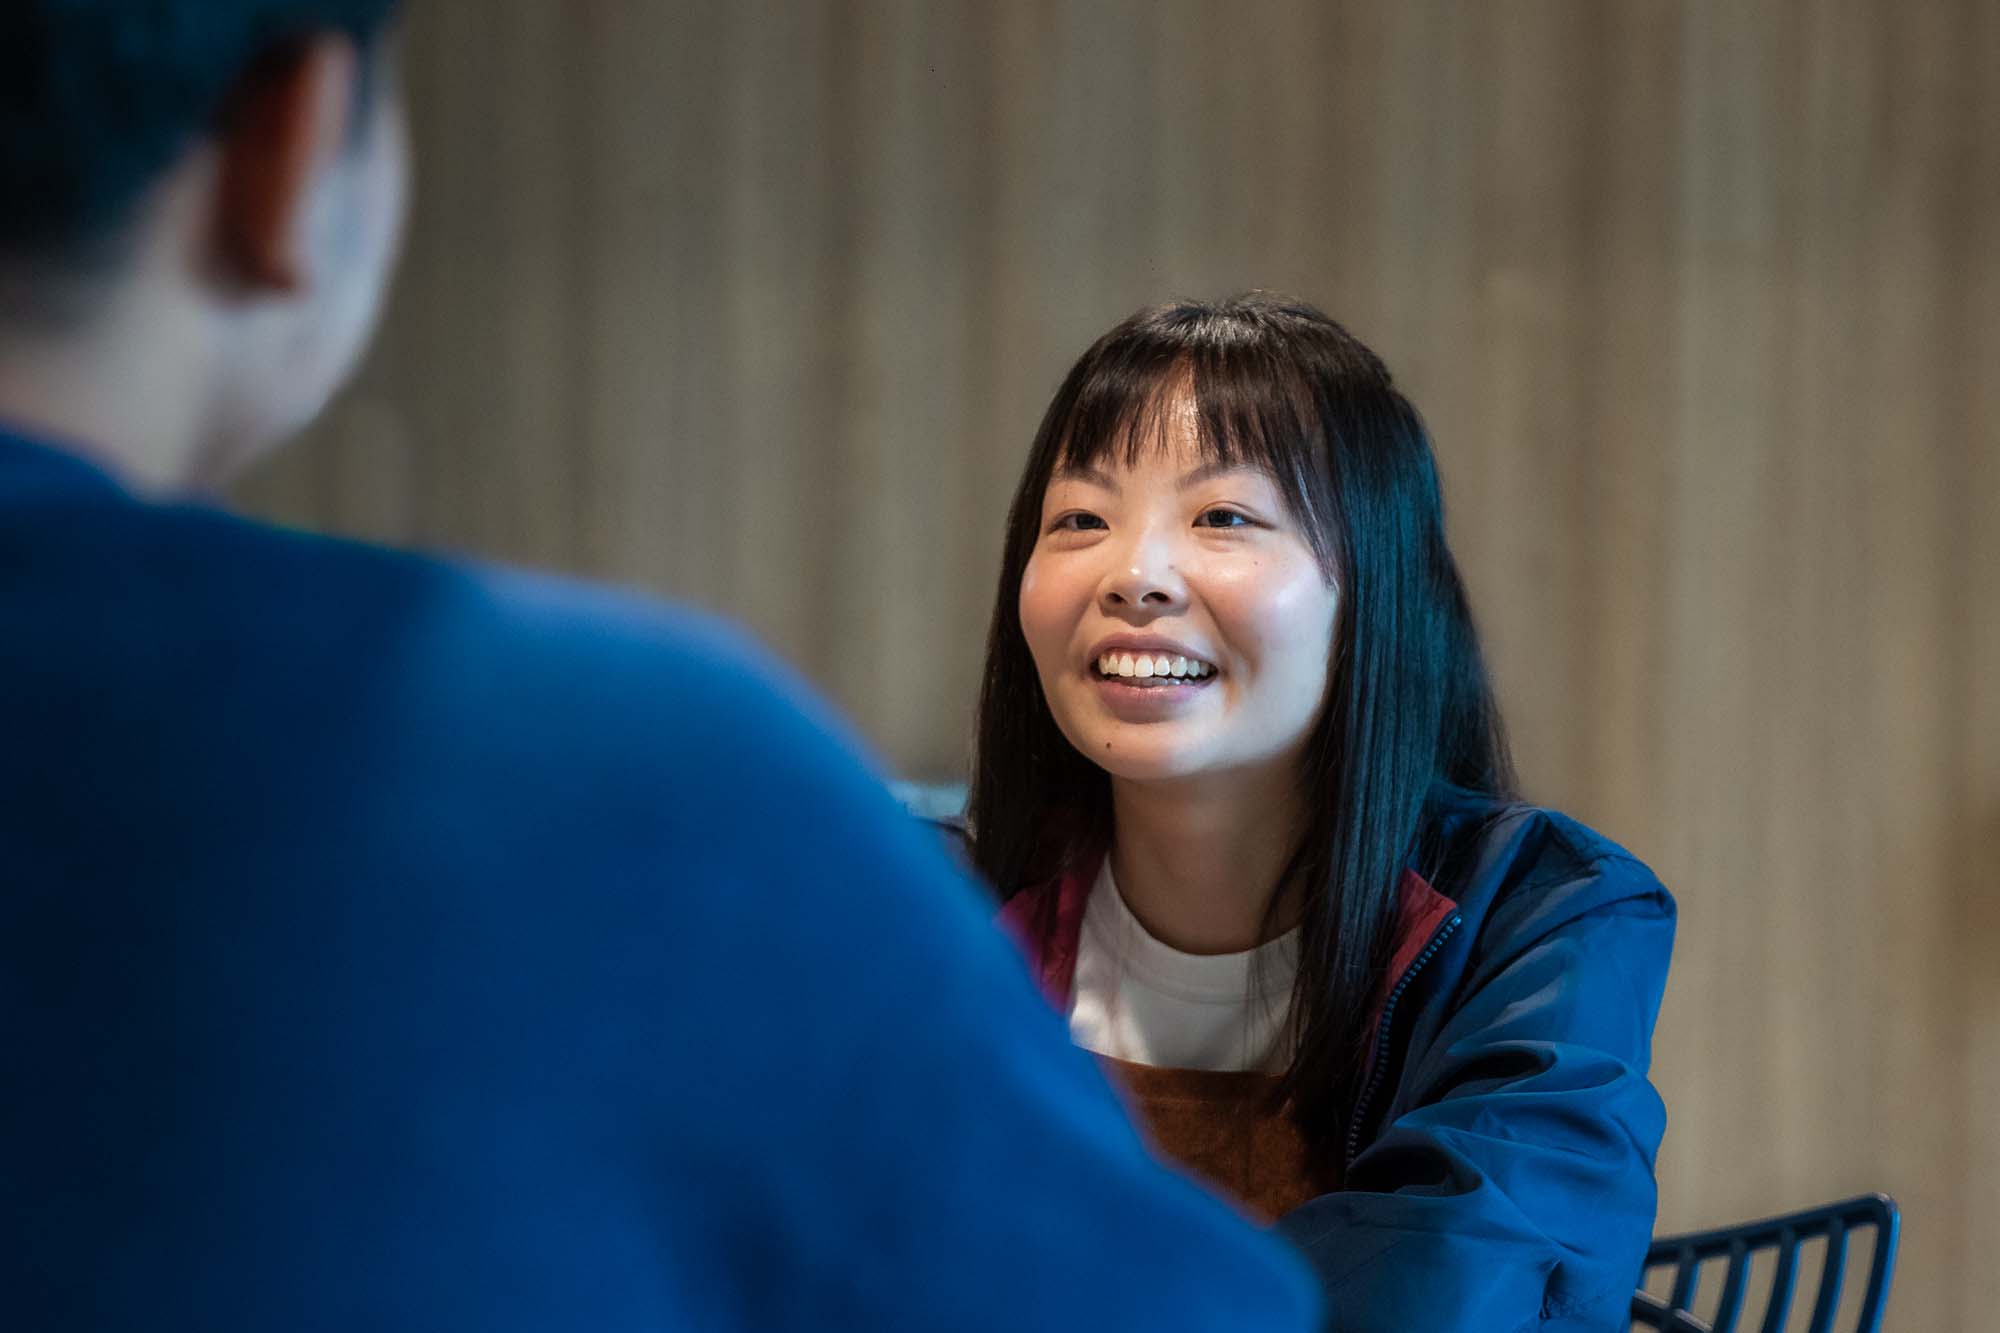 A profile shot of Amanda Wong shows her listening to another person during a conversation.